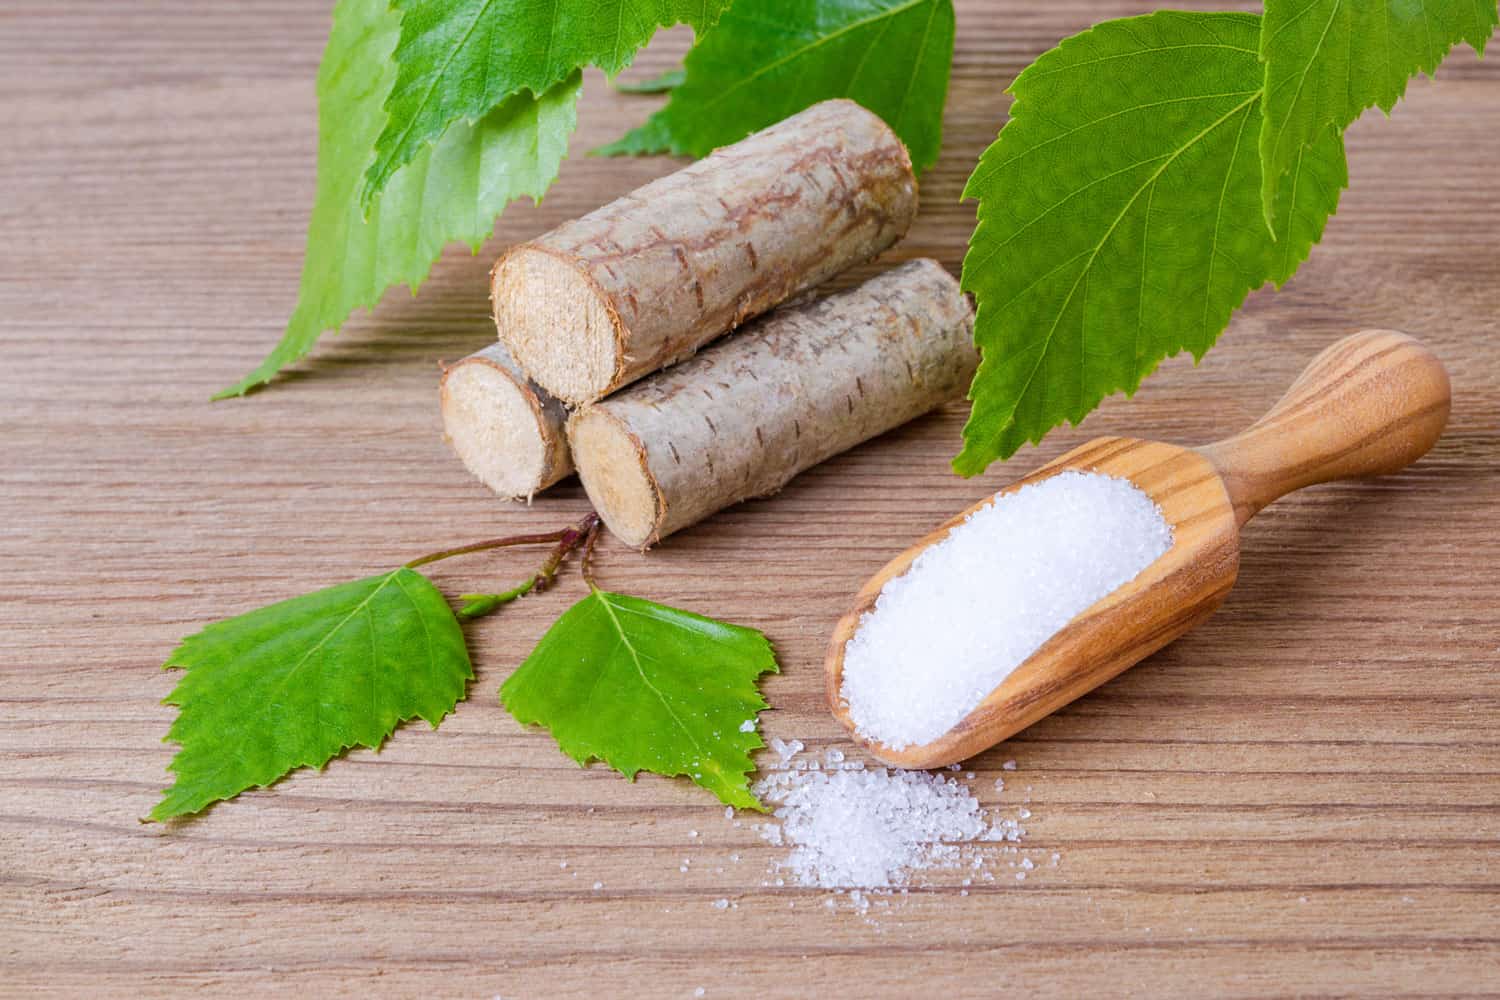 Xylitol extract